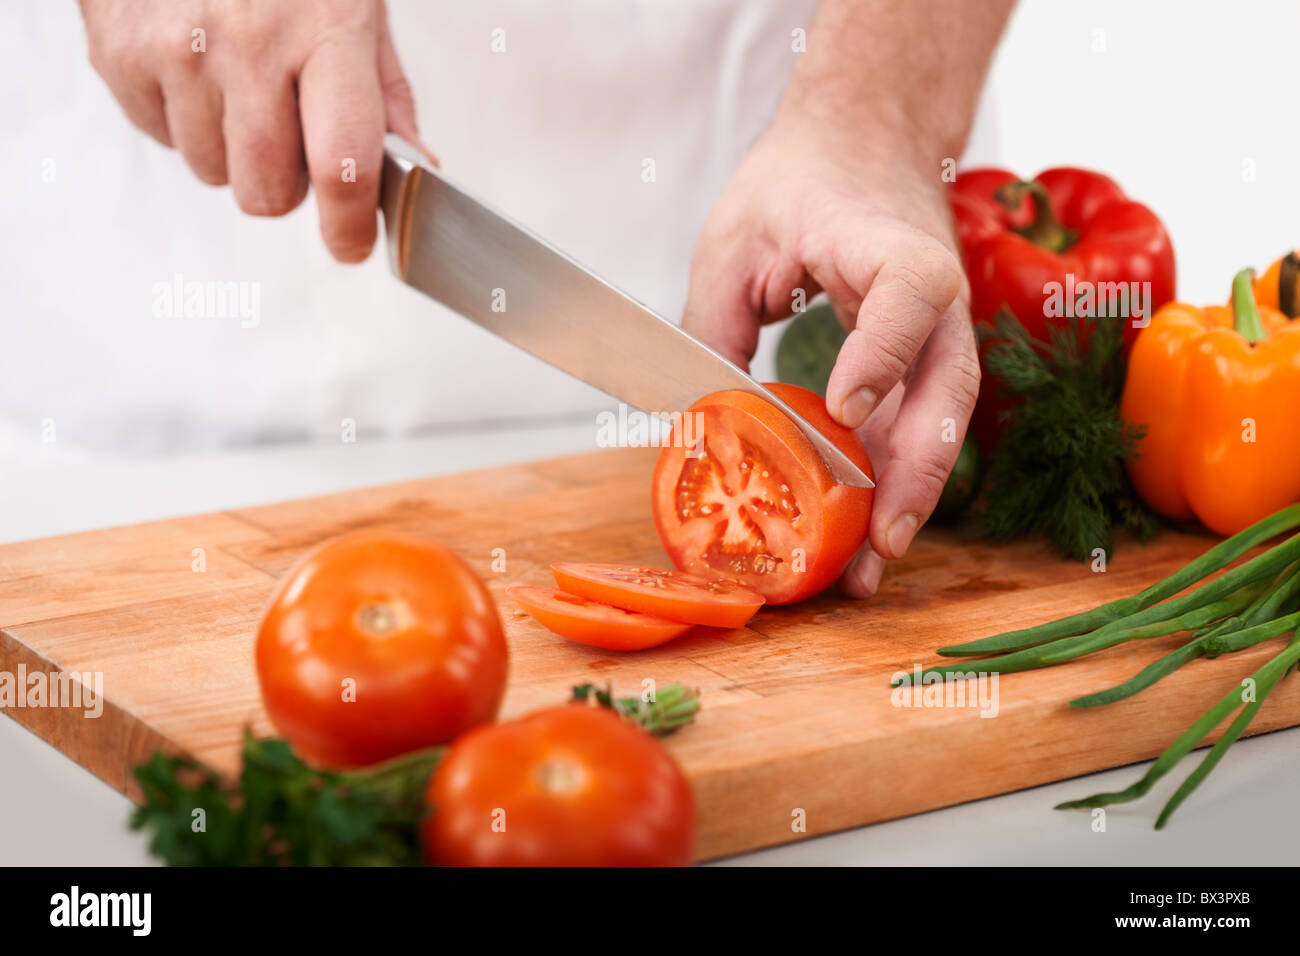 Image of male hand with knife cutting tomatoes on wooden chopping board  Stock Photo - Alamy